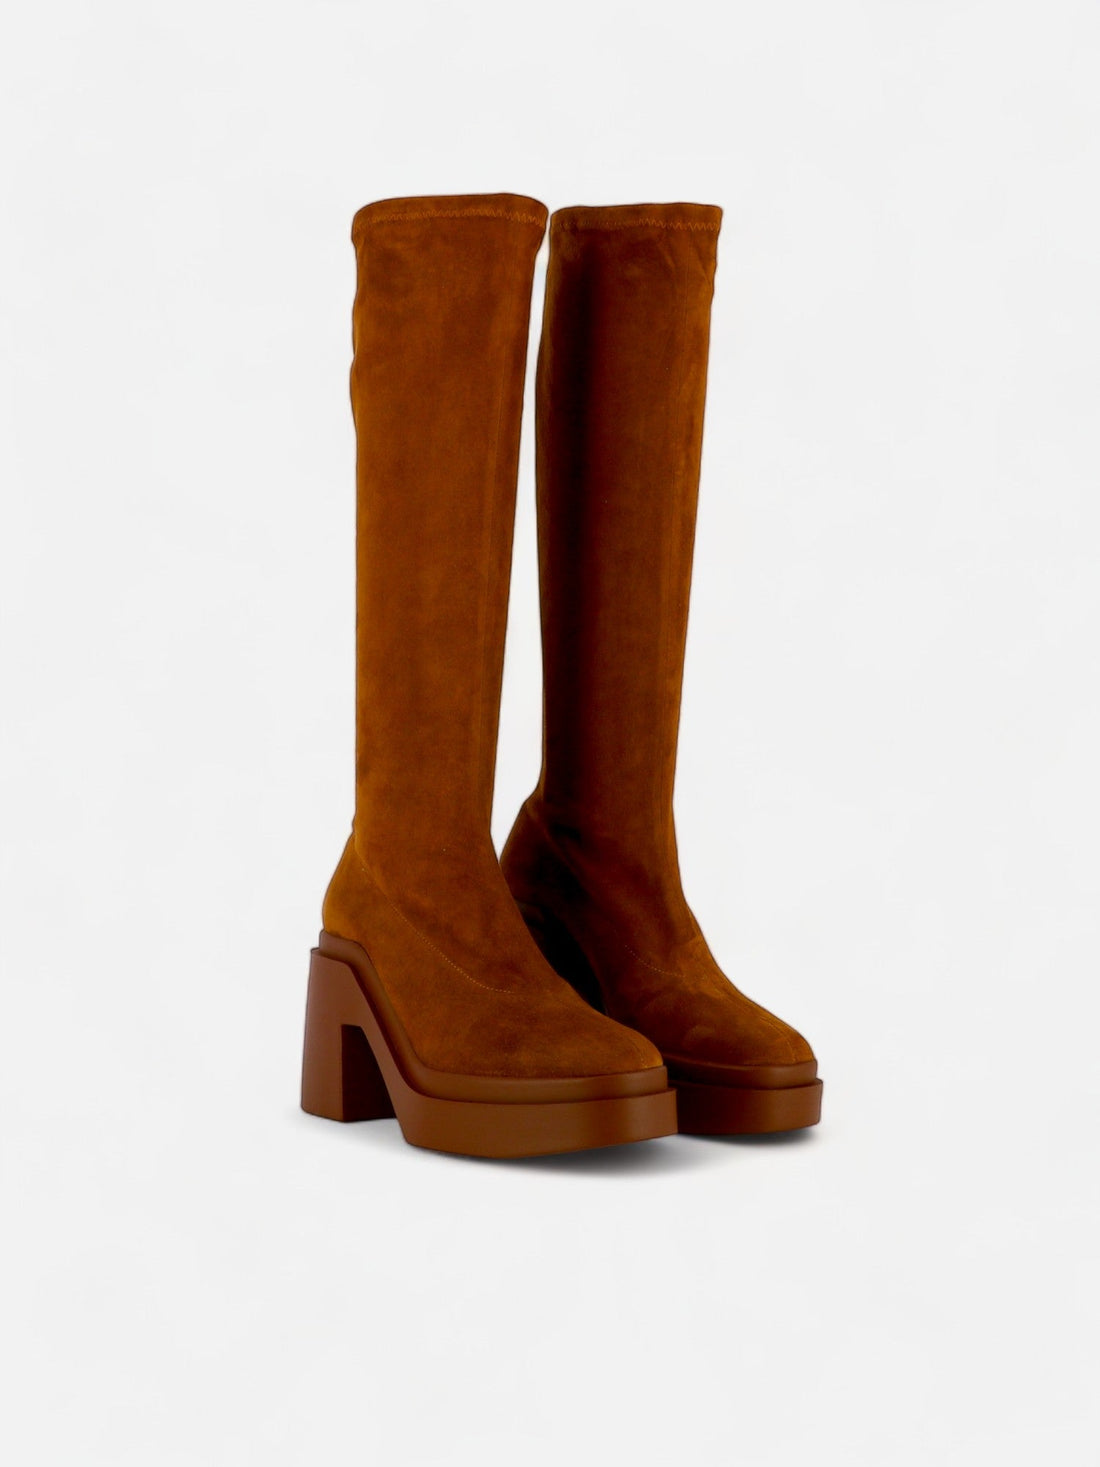 HIGH BOOTS - NALINI boots, stretch suede lambskin brown - 3606063818476 - Clergerie Paris - Europe